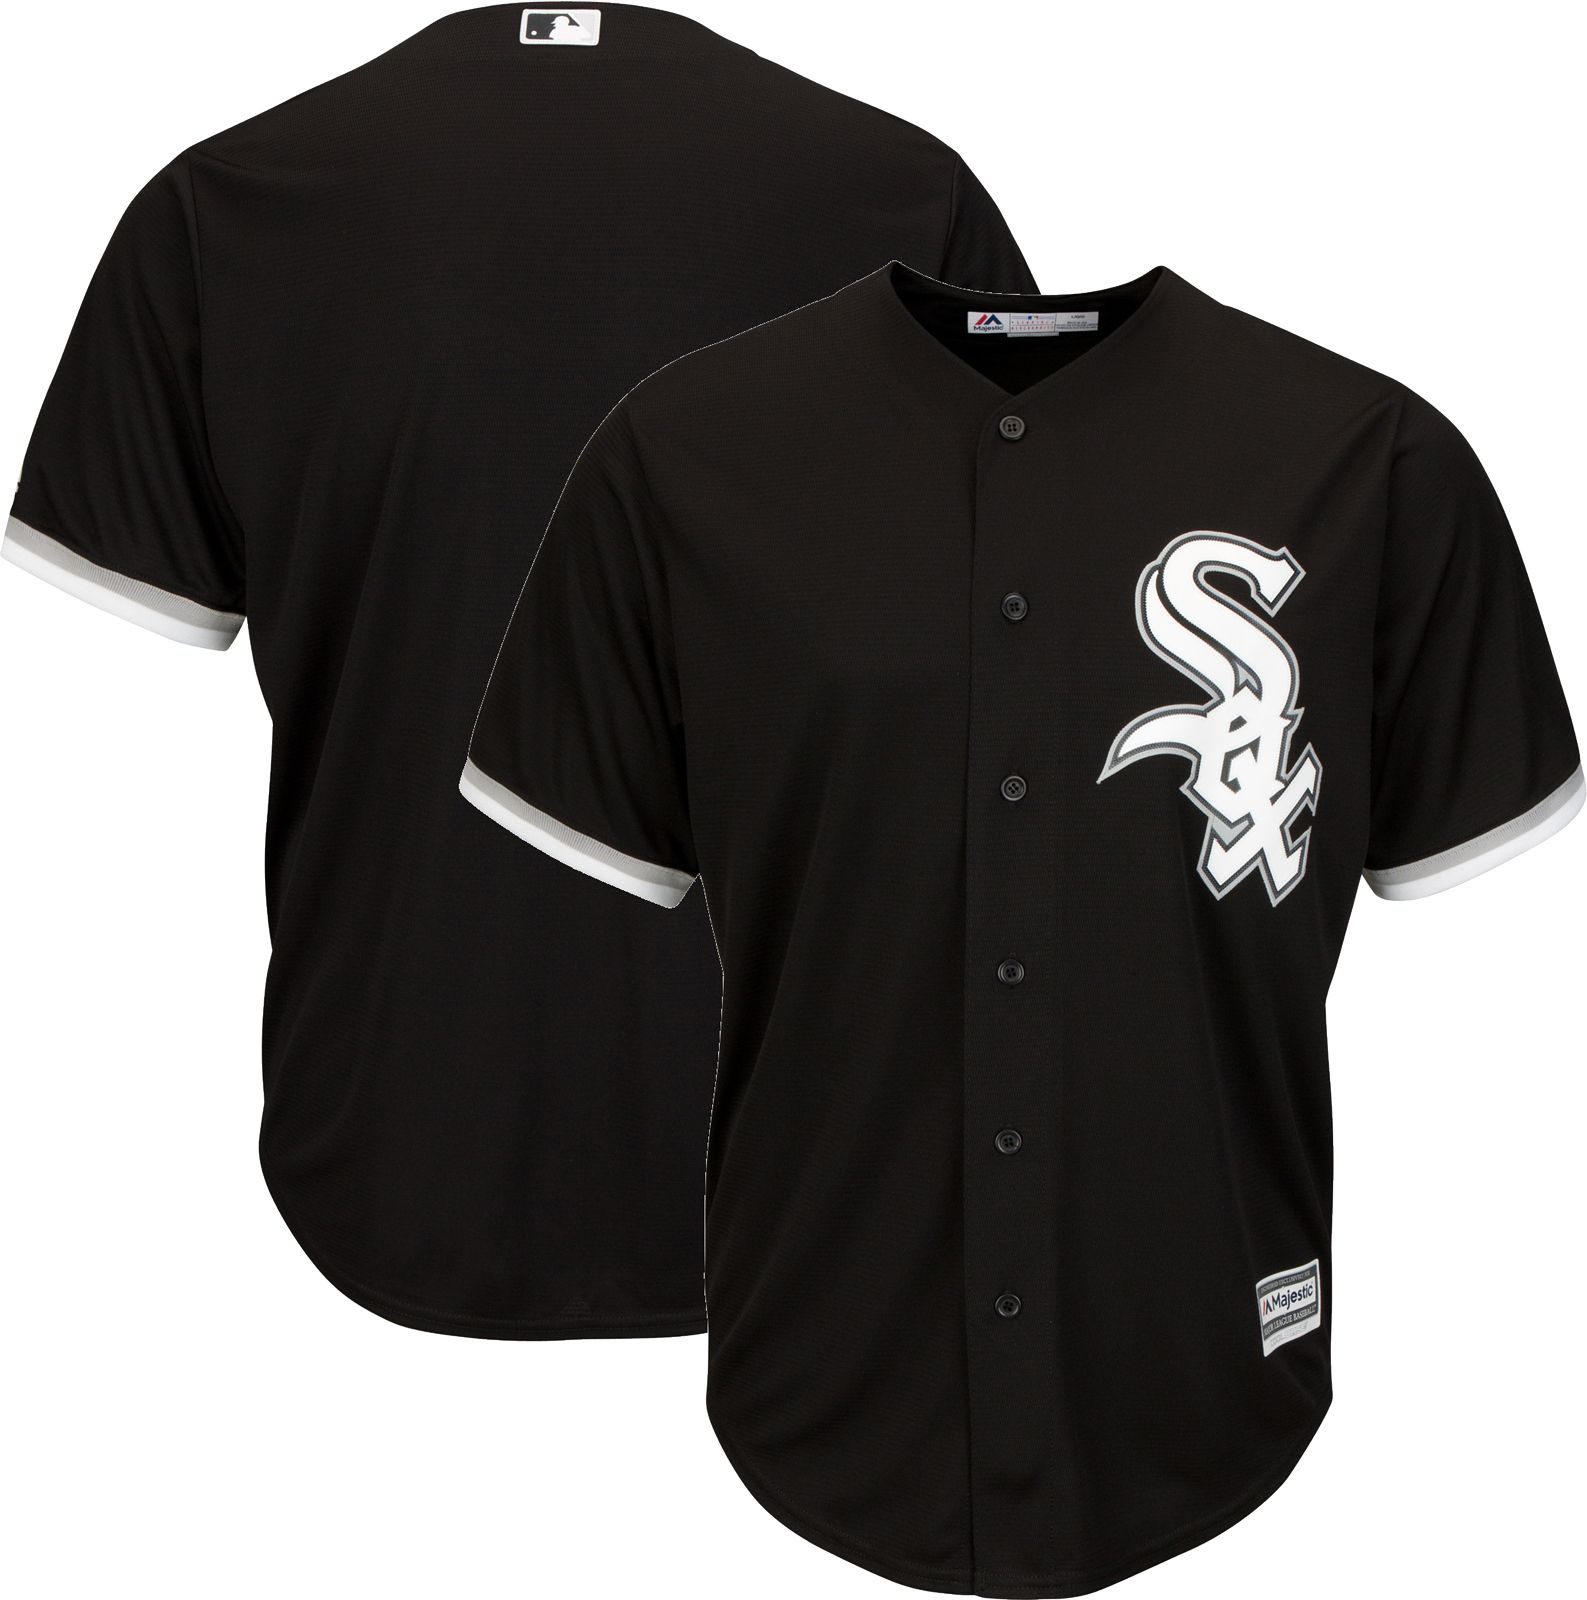 white sox jersey Online Shopping for 